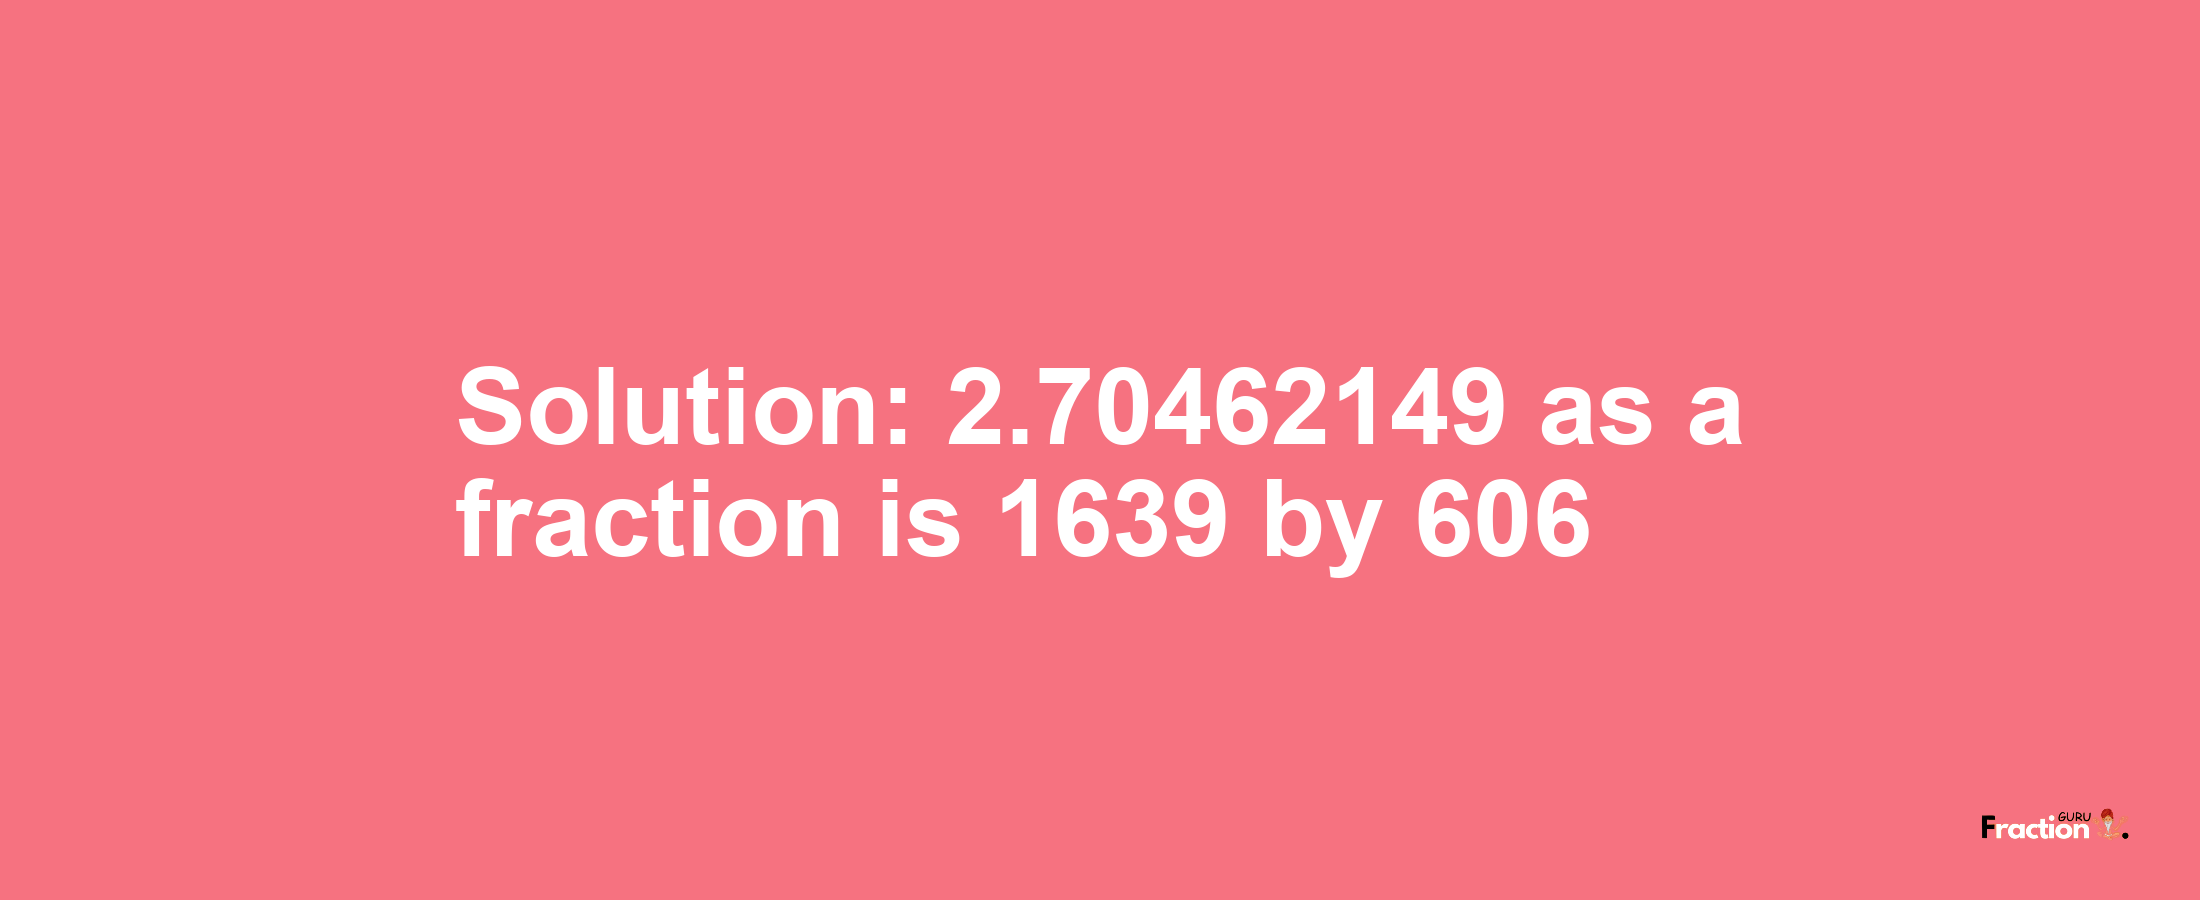 Solution:2.70462149 as a fraction is 1639/606